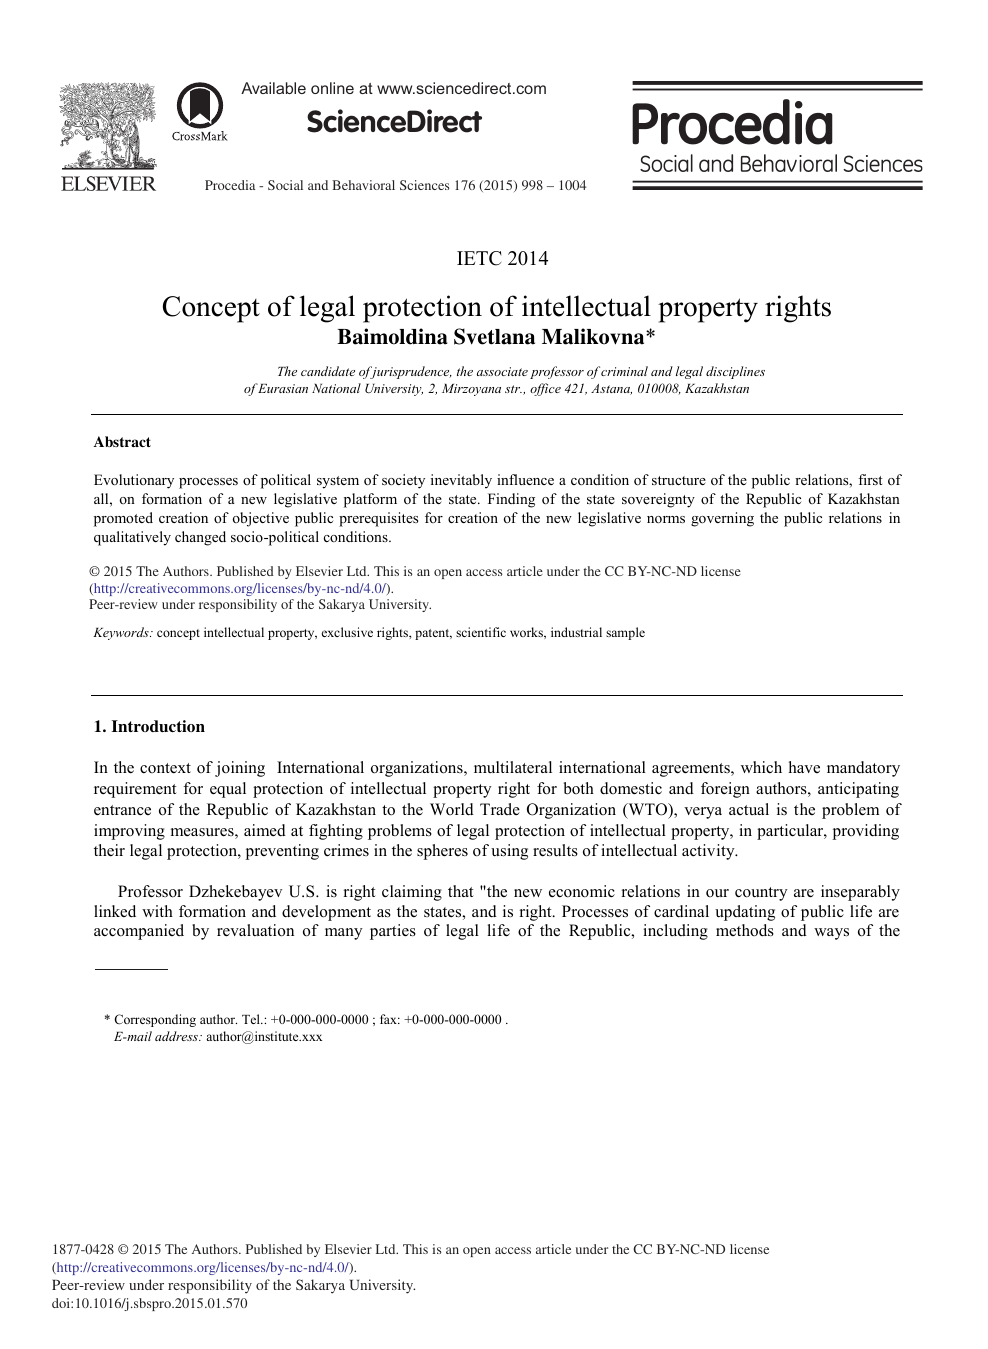 Concept Of Legal Protection Of Intellectual Property Rights Topic Of Research Paper In Law Download Scholarly Article Pdf And Read For Free On Cyberleninka Open Science Hub